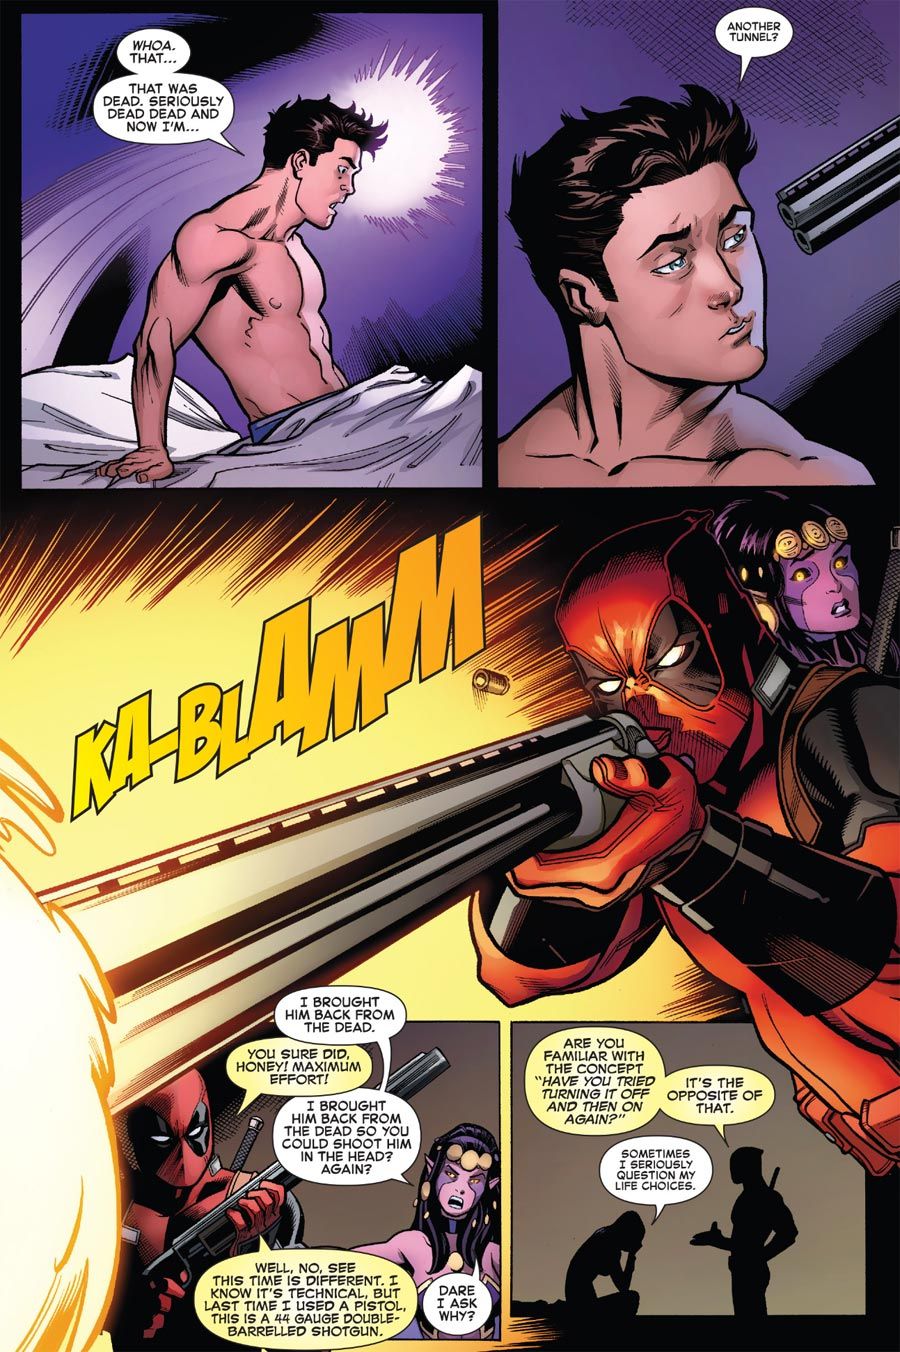 Peter Parker buys it at Deadpool's hand for the second time.